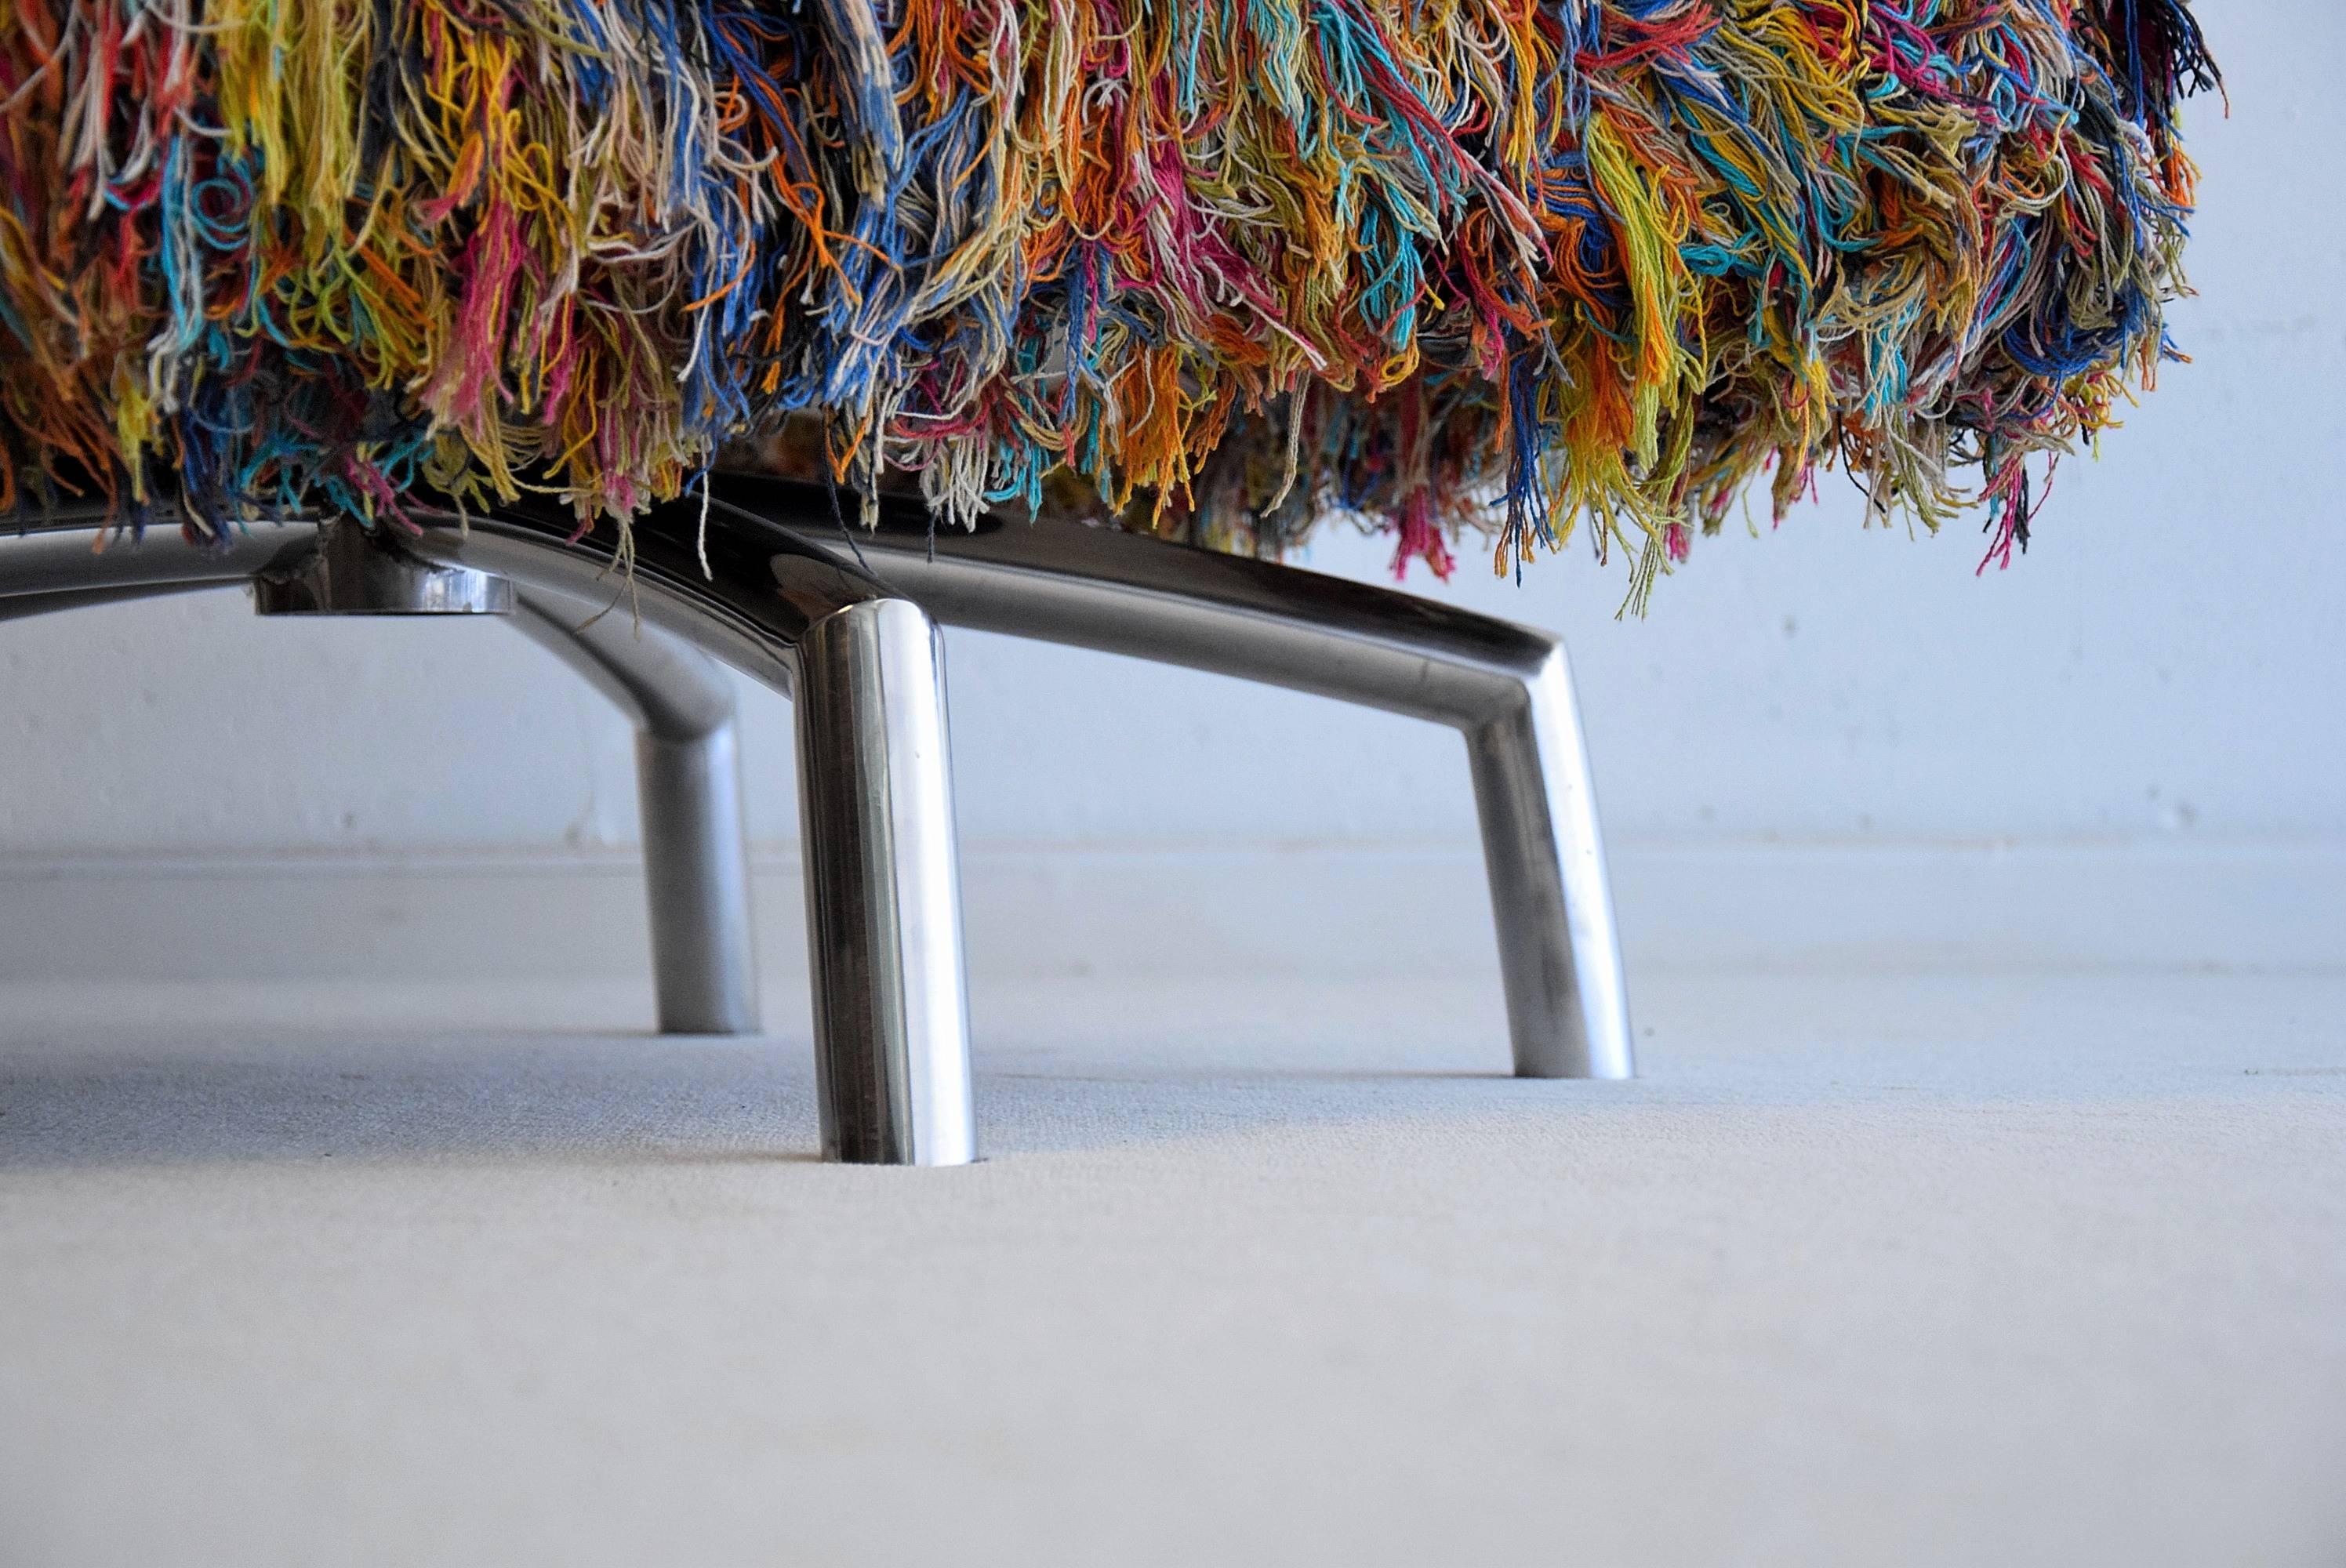 Swivel chair Giramundo.
Designed by Thomas Bina of Environment Furniture of Los Angeles, circa 2007.

It is crafted from recycled, Brazilian multicolored cotton yarn and swivels on polished, stainless steel legs.

Measurements : H 66 x W 81 x D 75